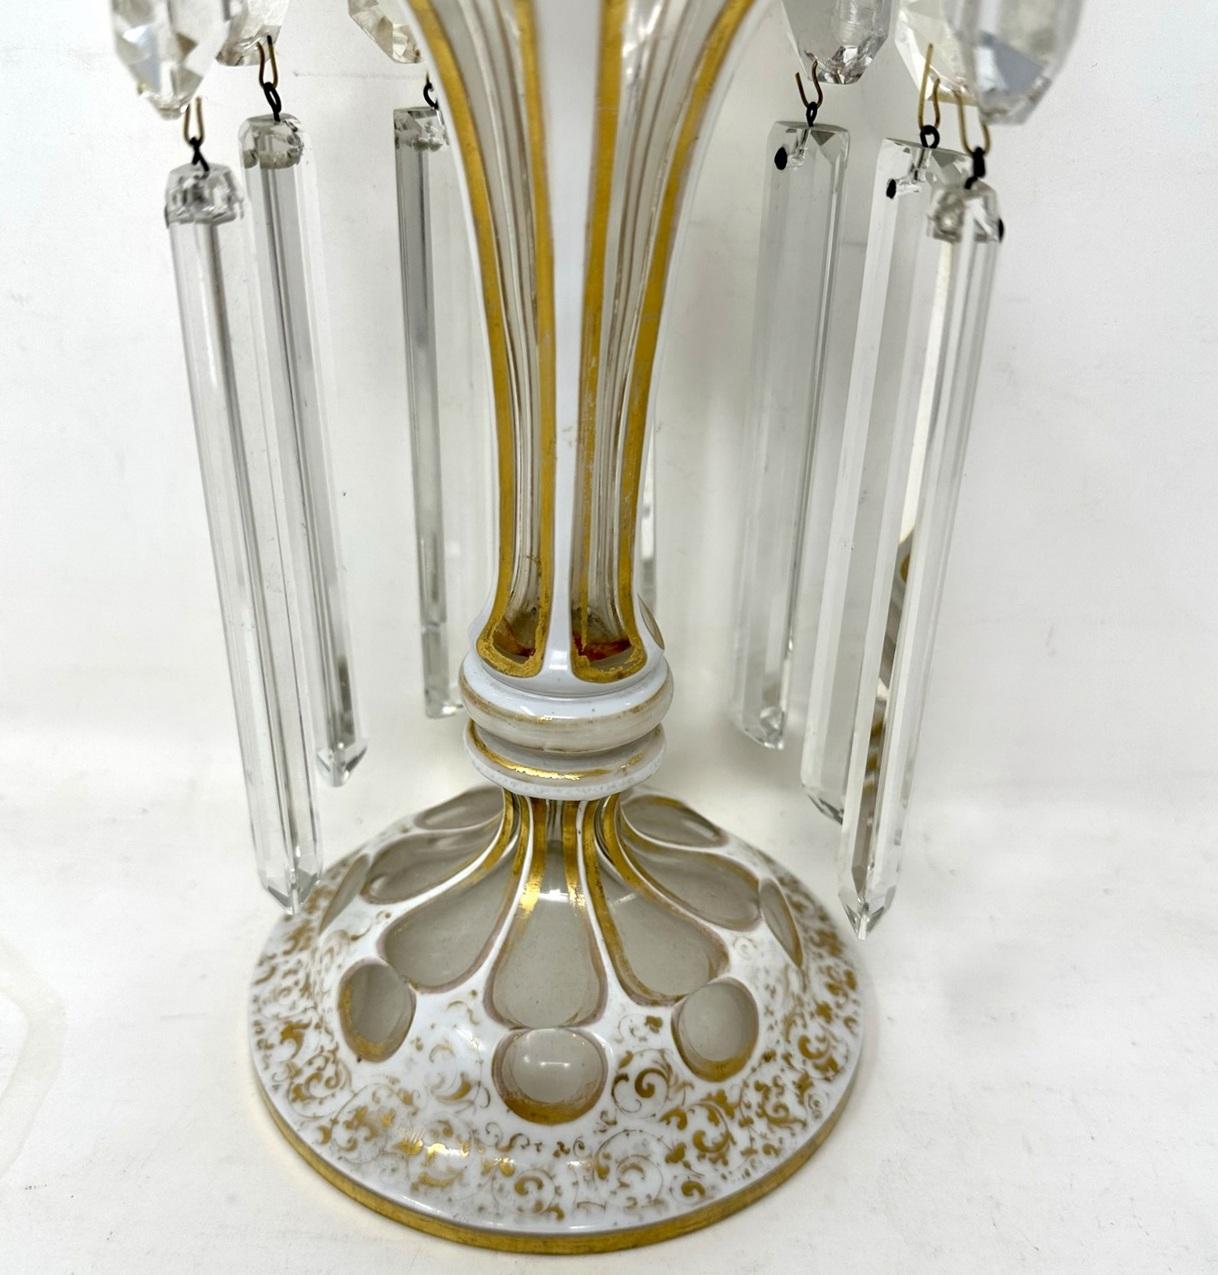 Antique Crystal Bohemian Cream Gilt Enamel Lusters Lustres Candlestick Vase In Good Condition For Sale In Dublin, Ireland